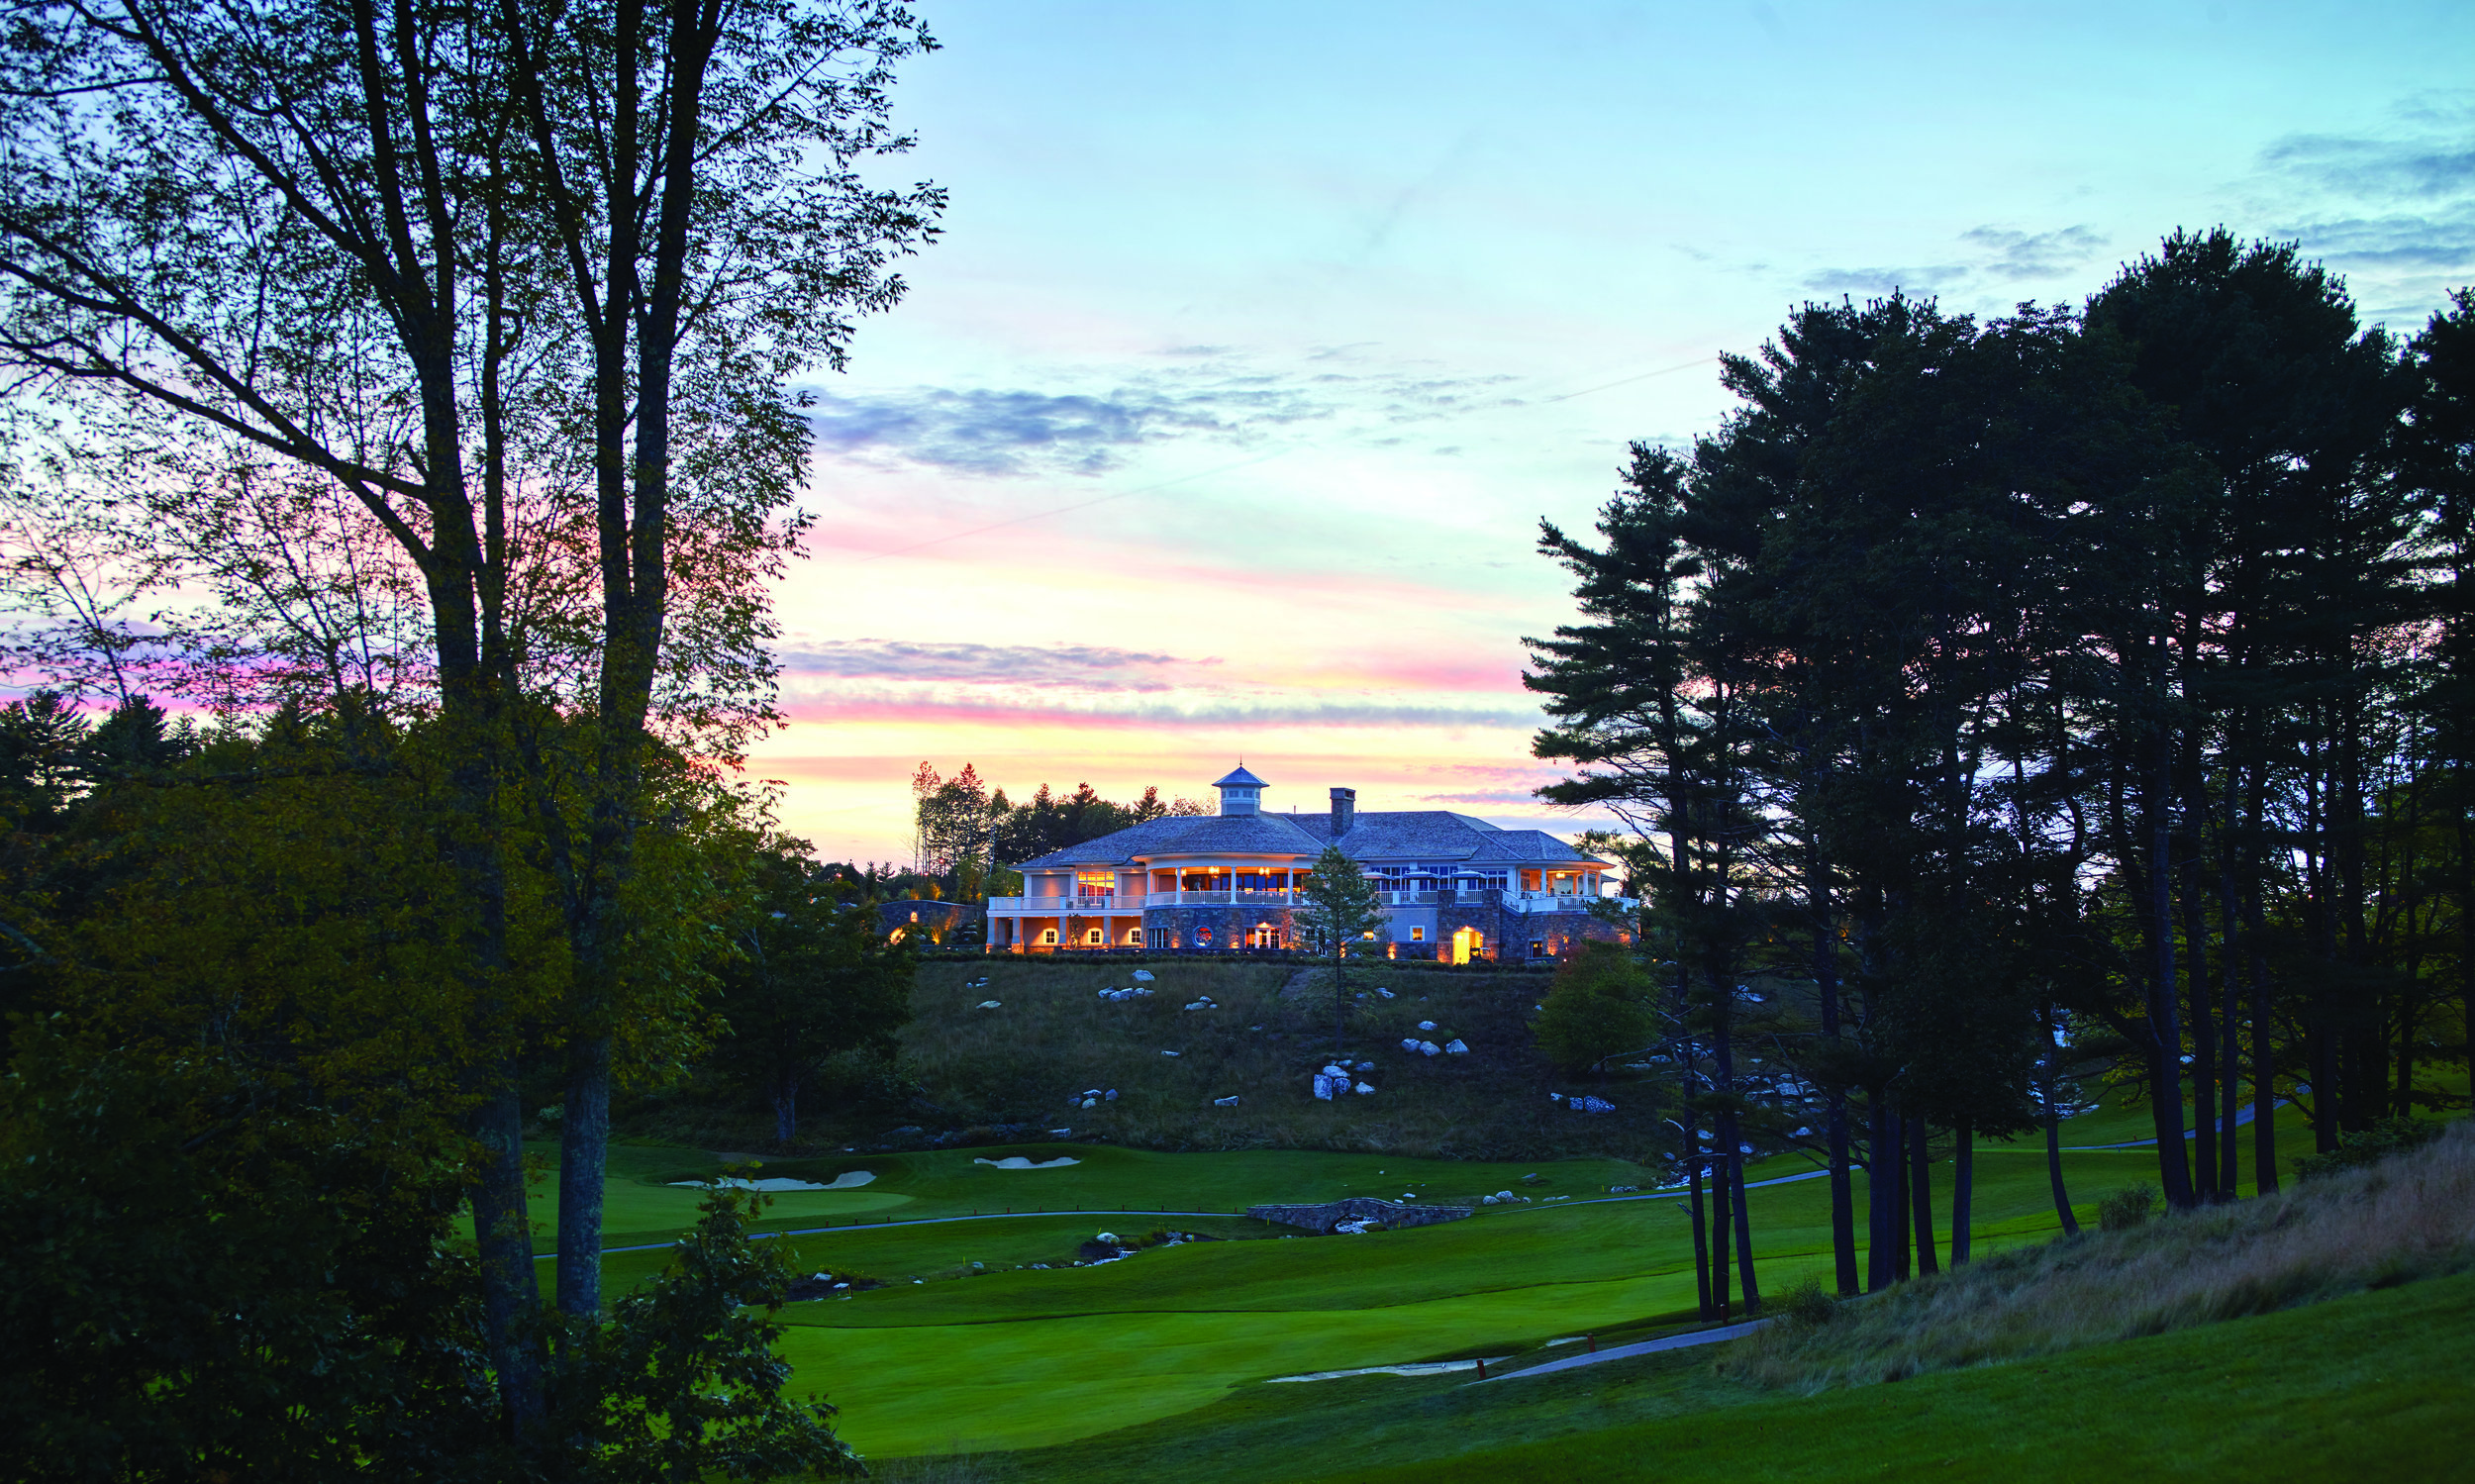 Clubhouse at dusk (Copy)